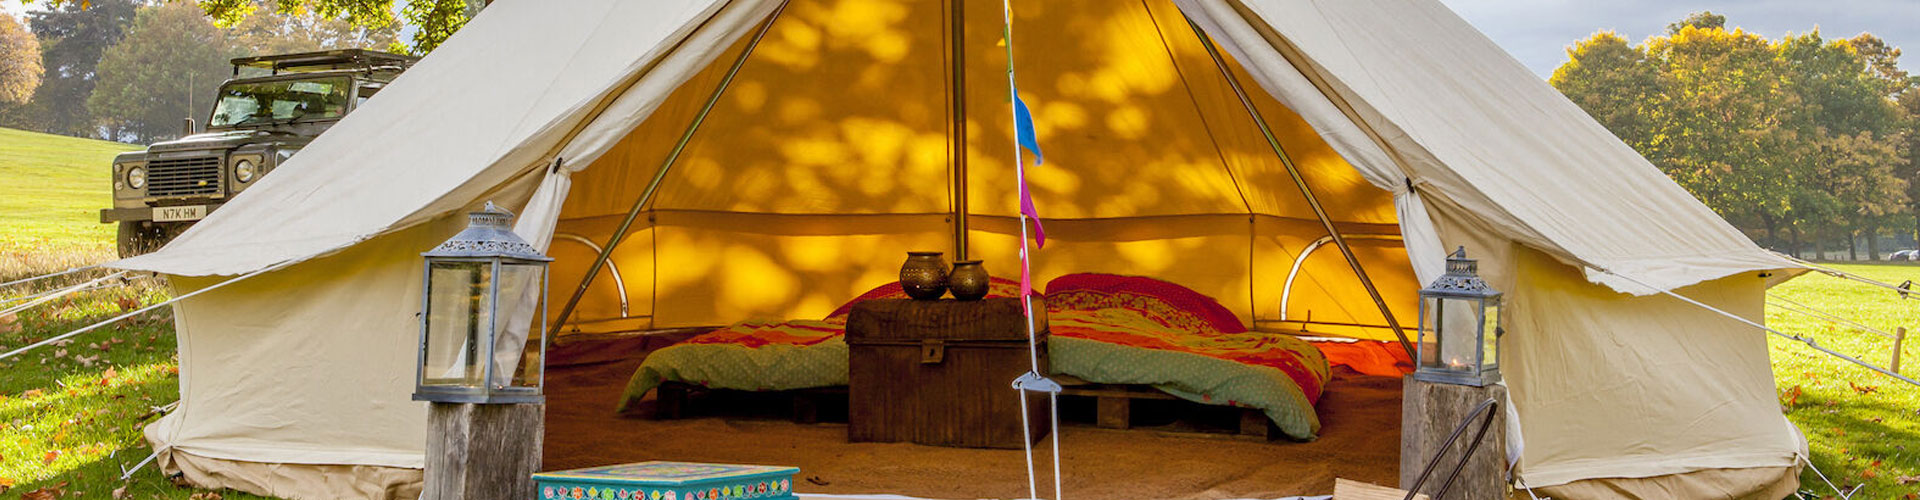 bell-tent